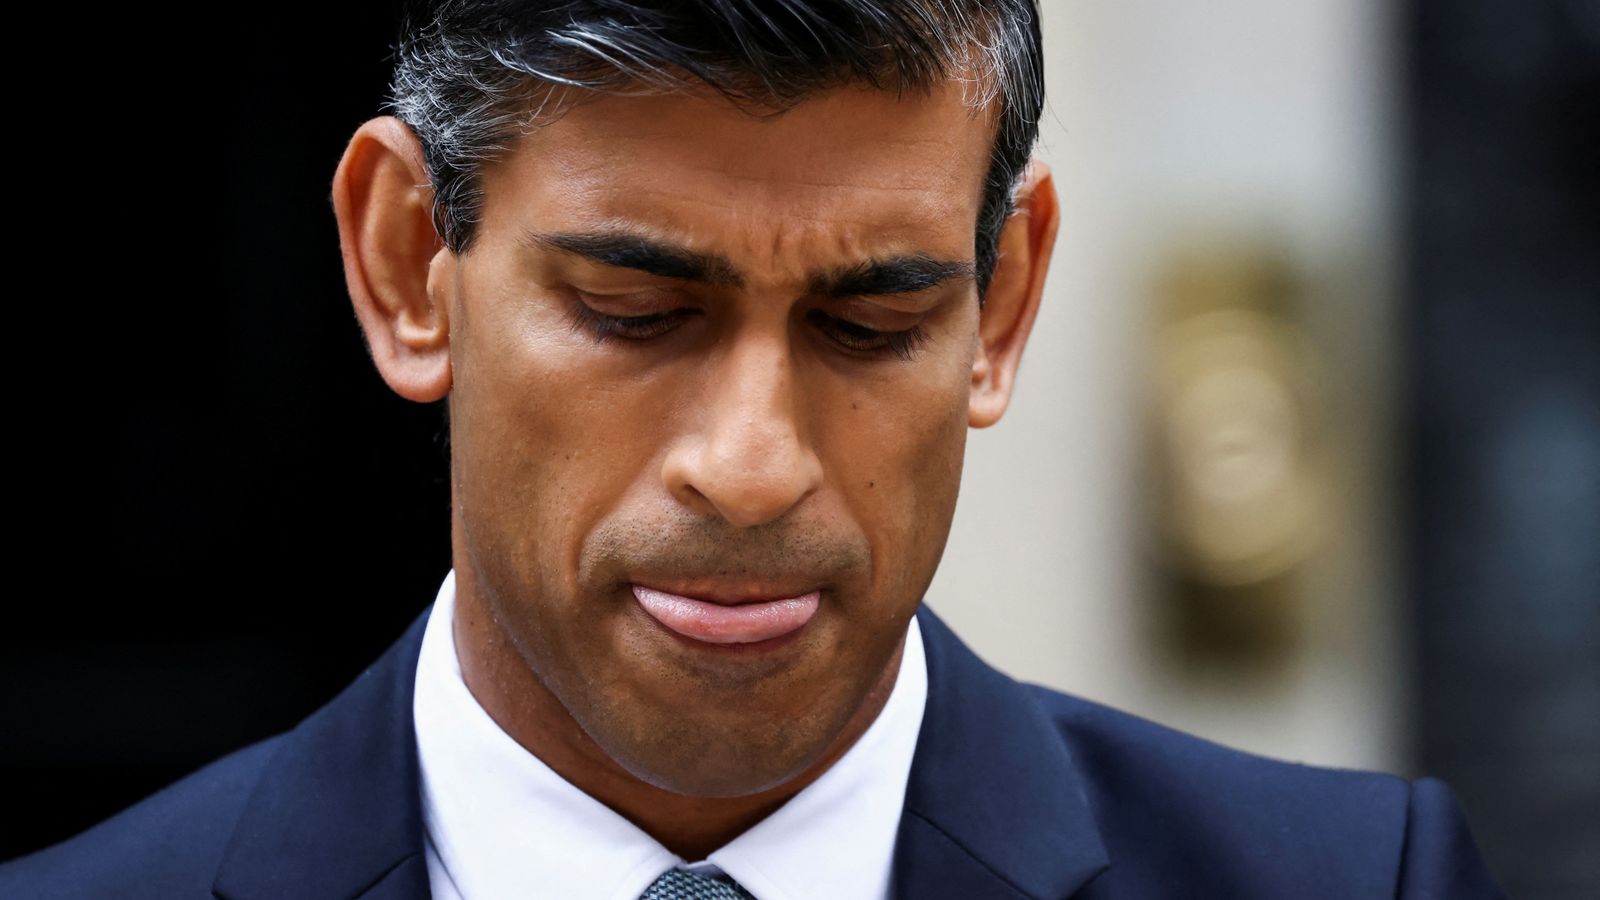 No fanfare for Rishi Sunak as his sombre speech will calm colleagues and voters